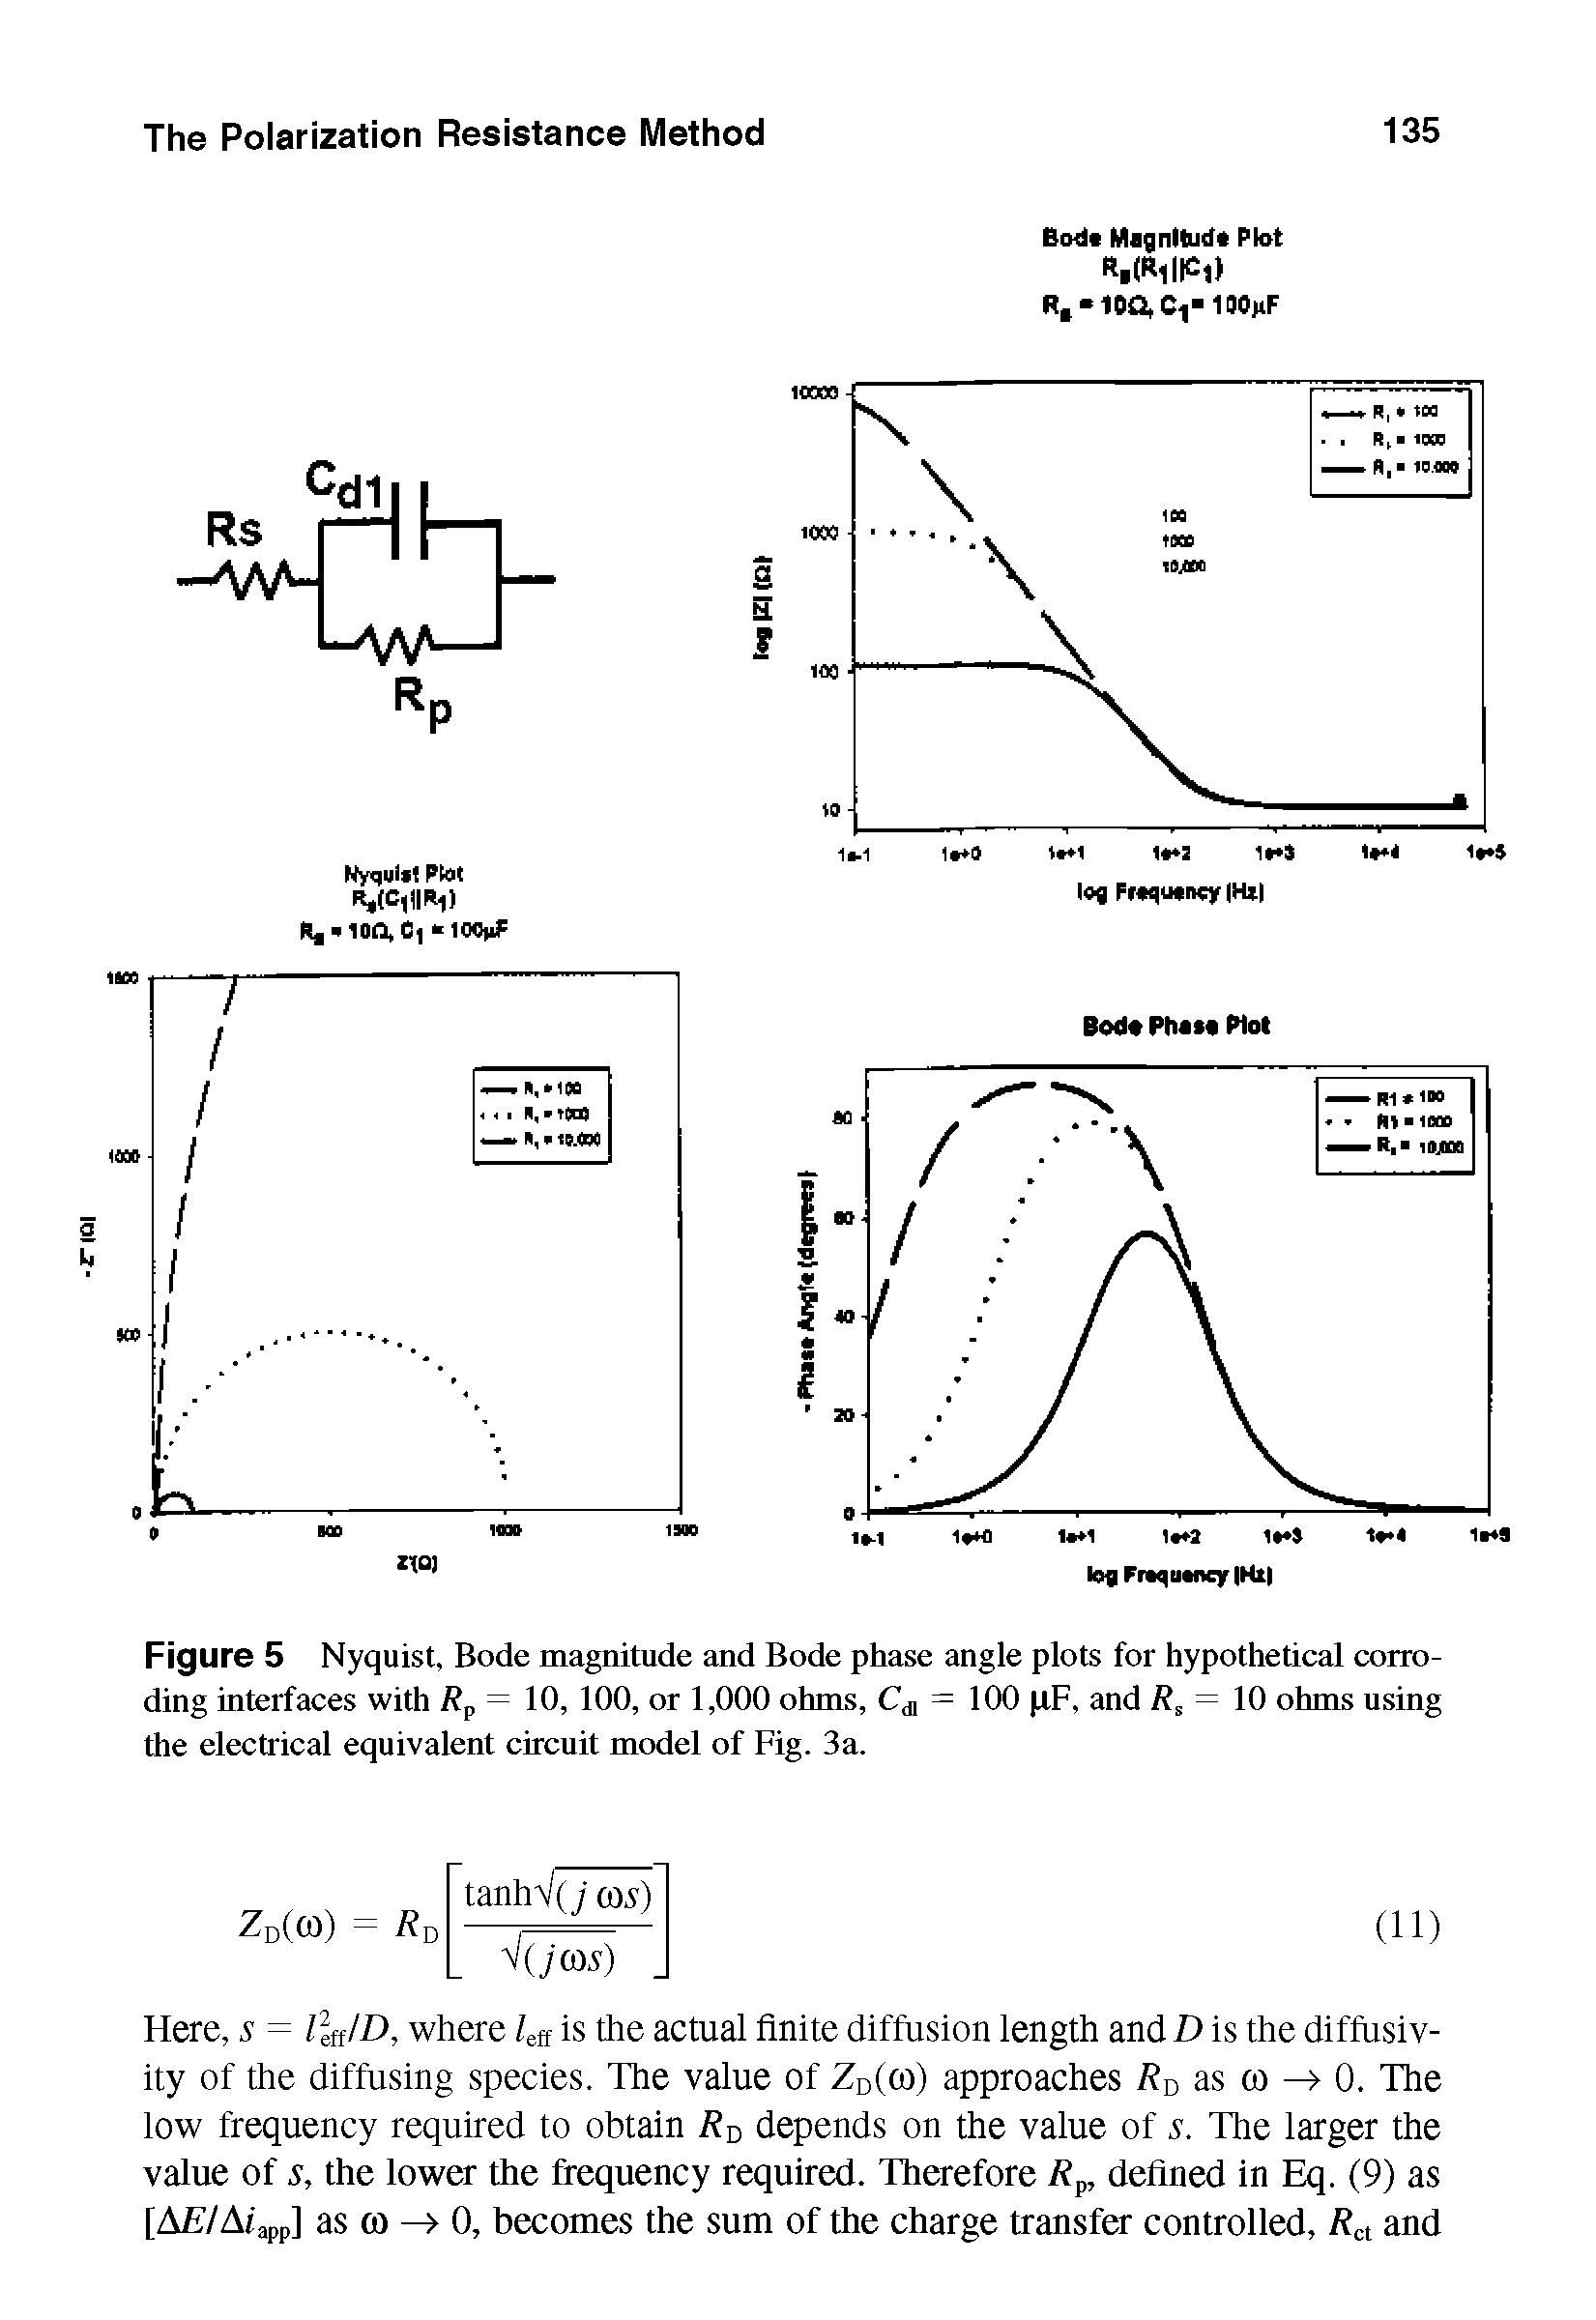 Figure 5 Nyquist, Bode magnitude and Bode phase angle plots for hypothetical corroding interfaces with Rp = 10, 100, or 1,000 ohms, Cd, = 100 tF, and Rs = 10 ohms using the electrical equivalent circuit model of Fig. 3a.